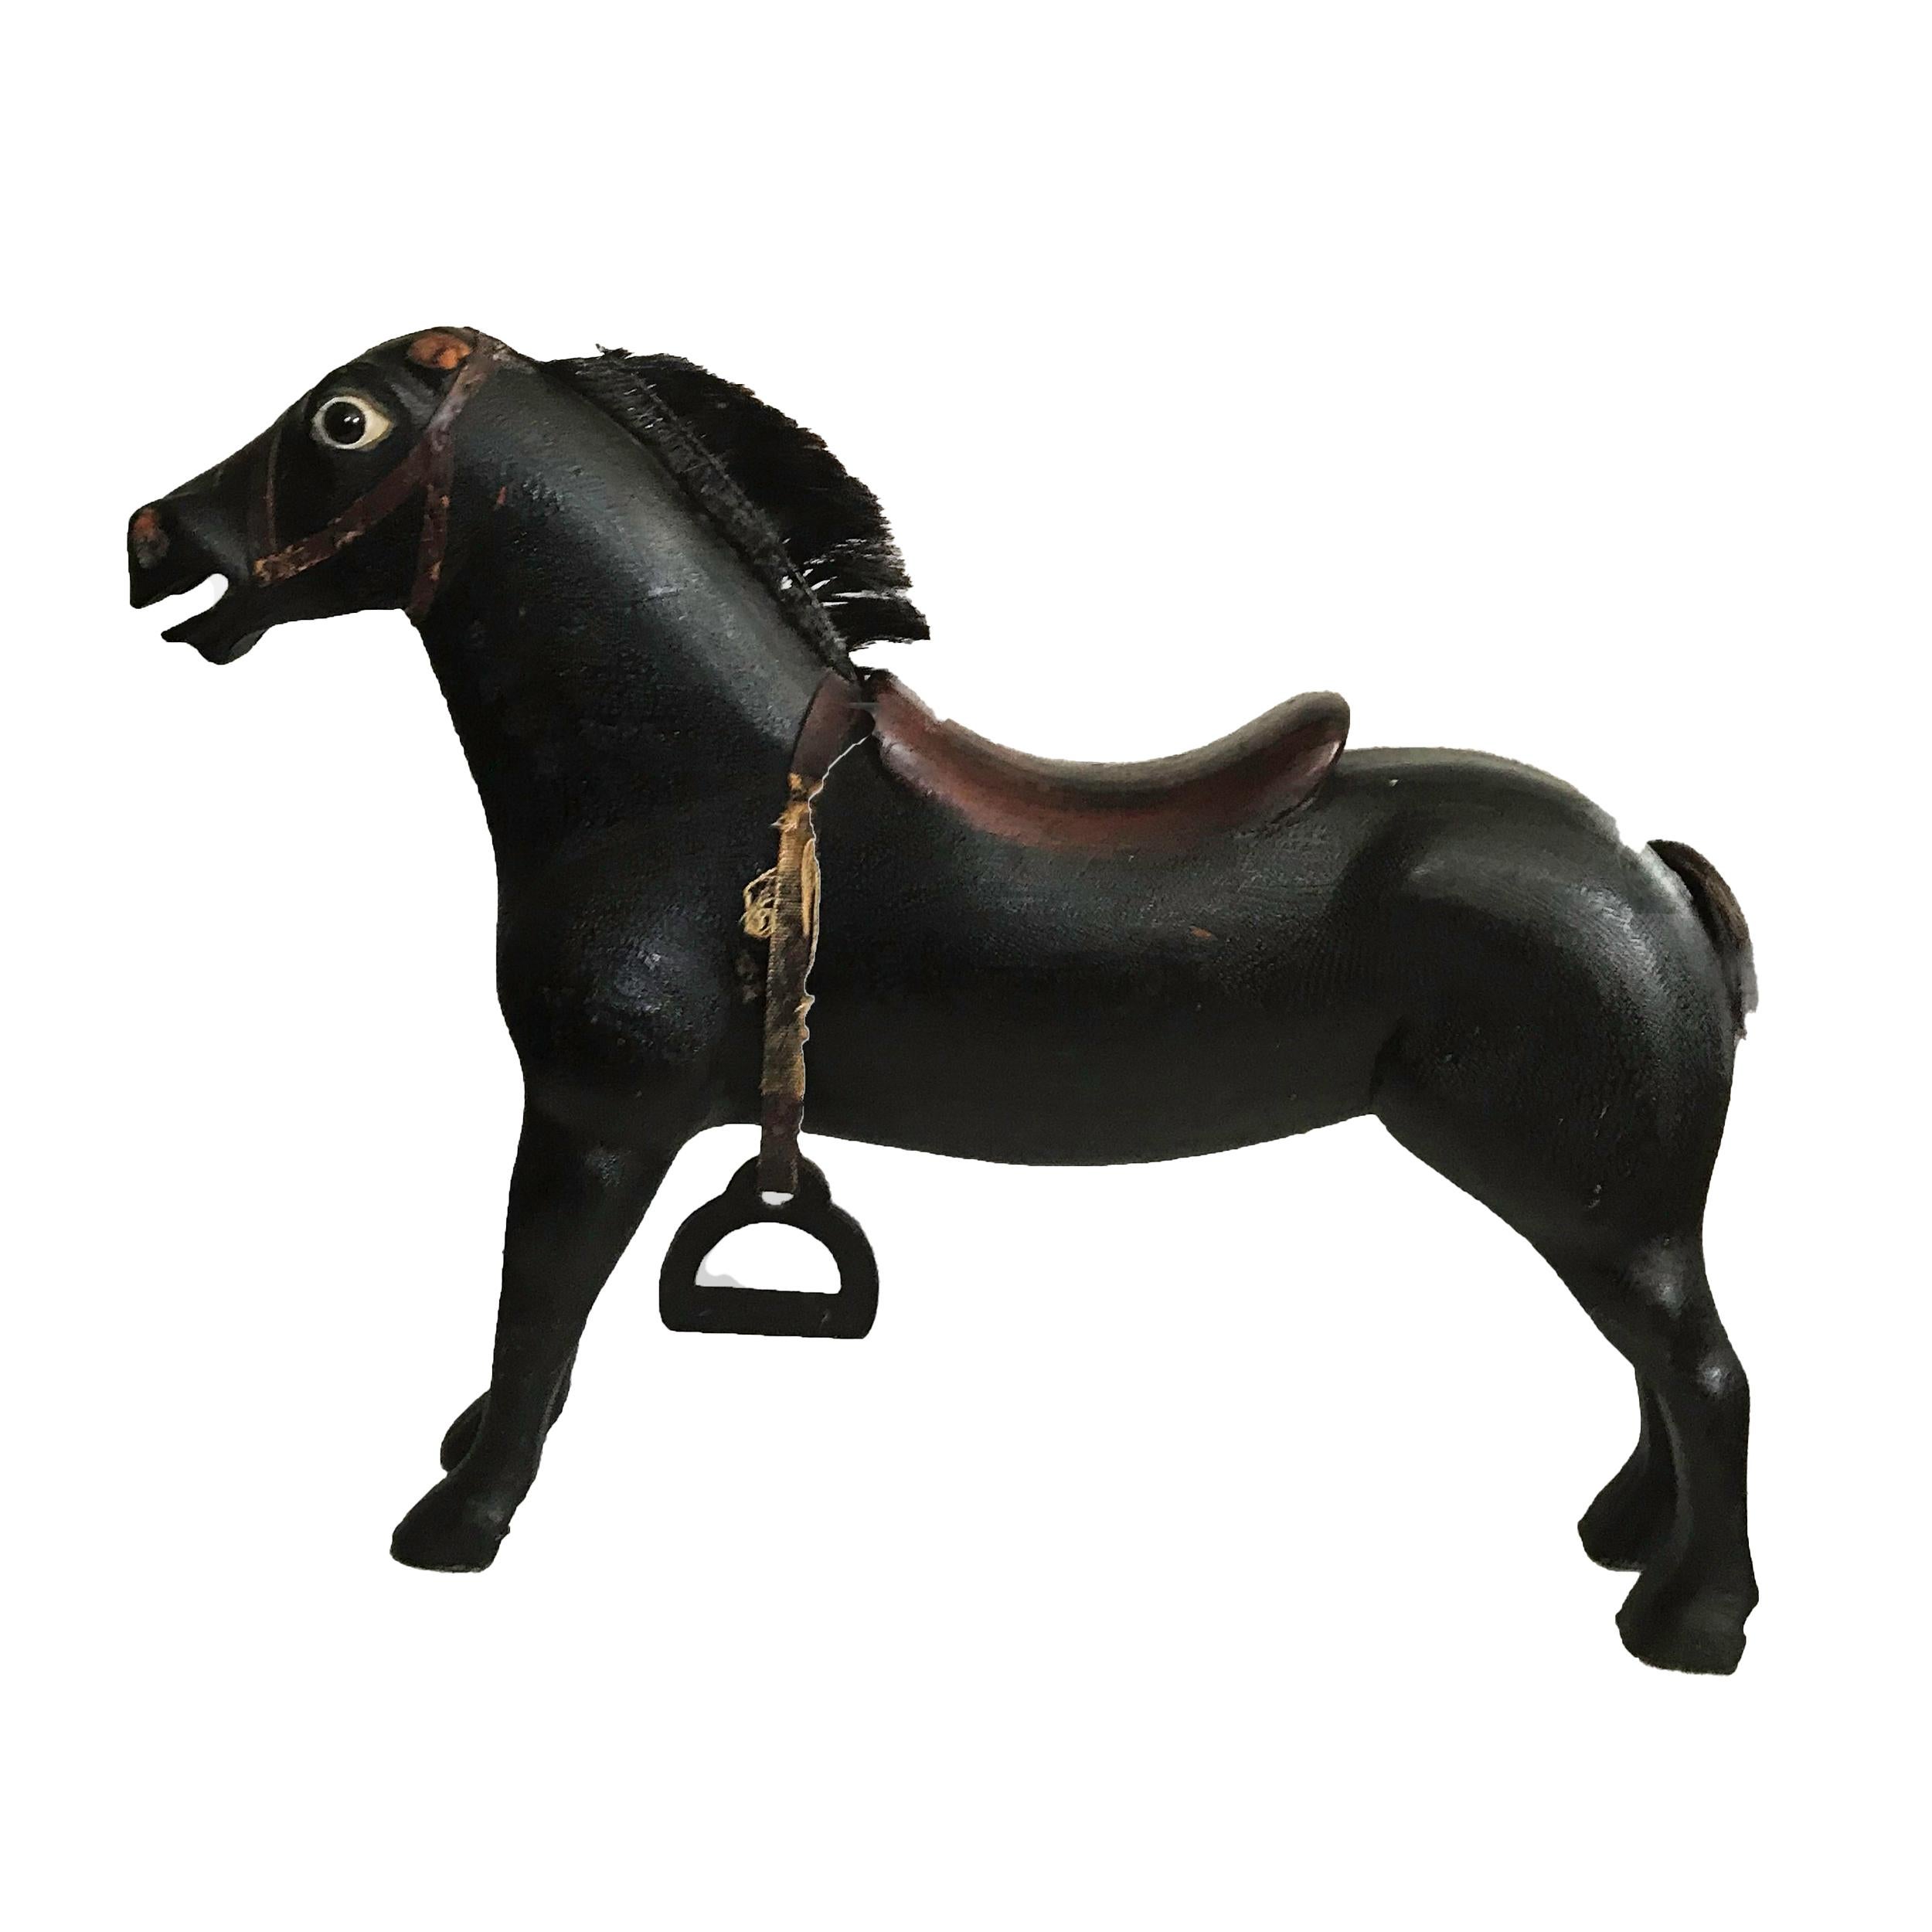 Painted black with a red saddle, glass eyes and hairm. Missing one of its stirrups, the stirrup is carved from wood and is hanging from its original thick canvas. The ears which were probably leather are missing. A strong amount of crazing indicates